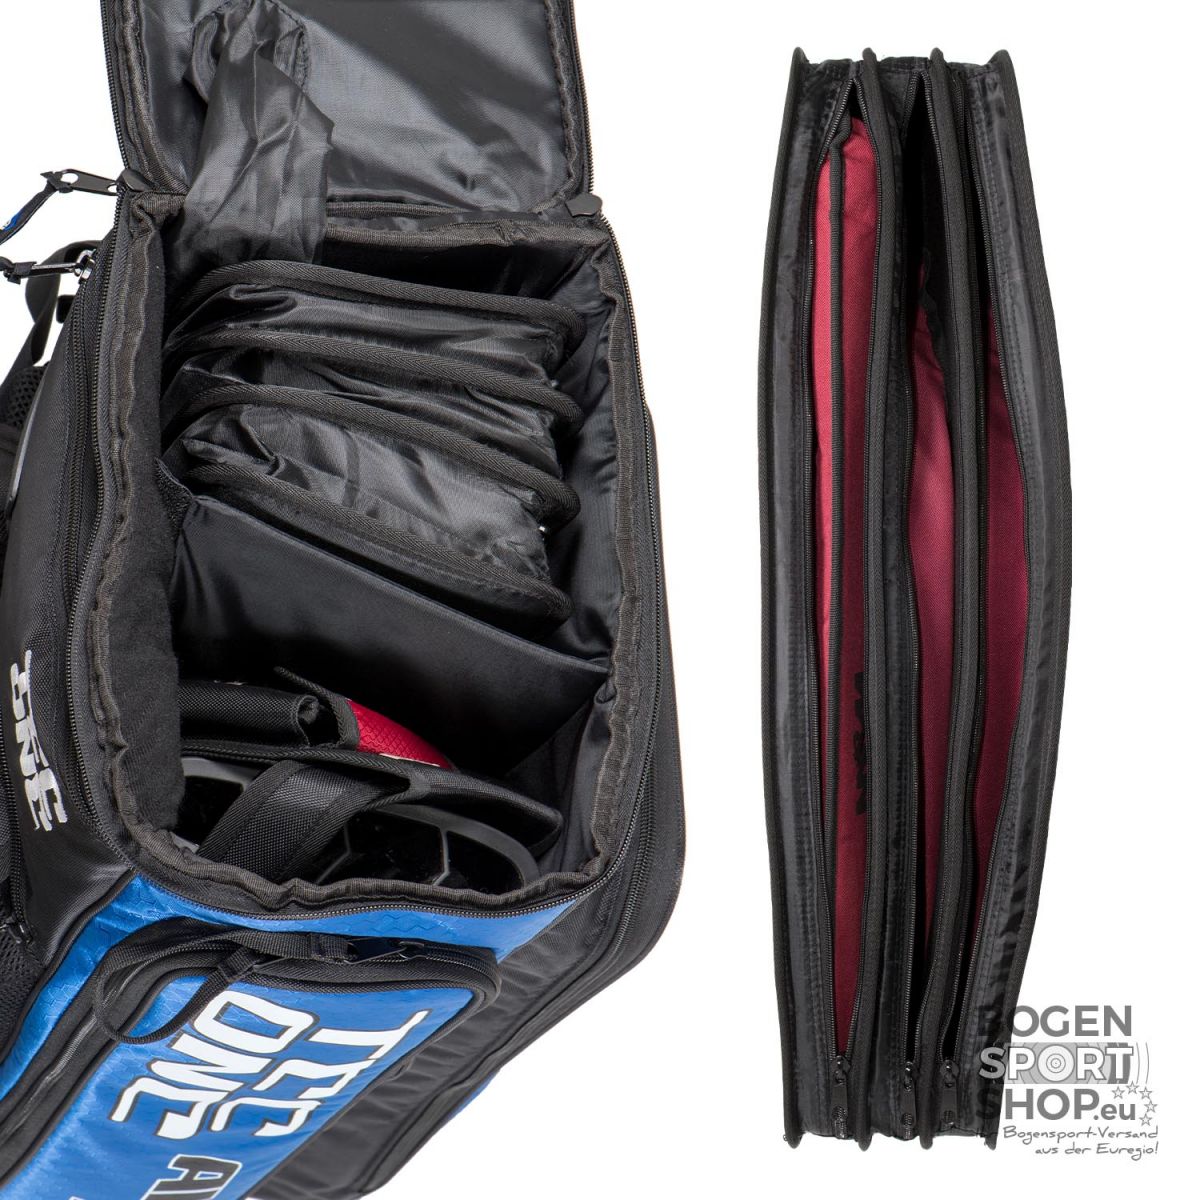 Avalon Recurve Backpack Tec One